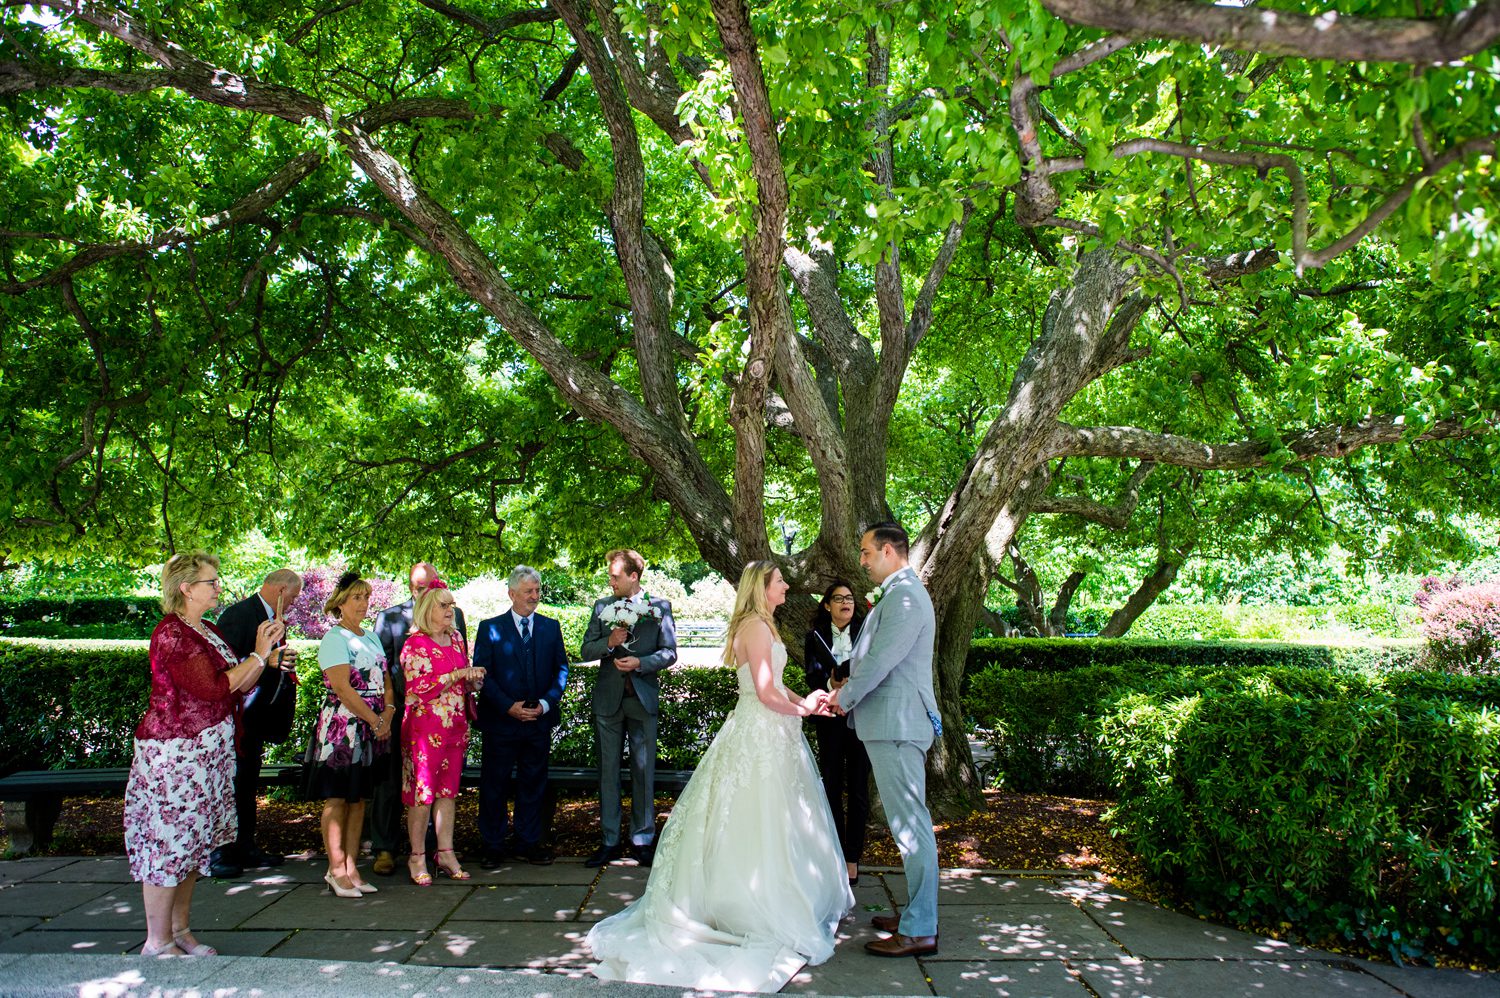 Micro Wedding in the Conservatory Garden 